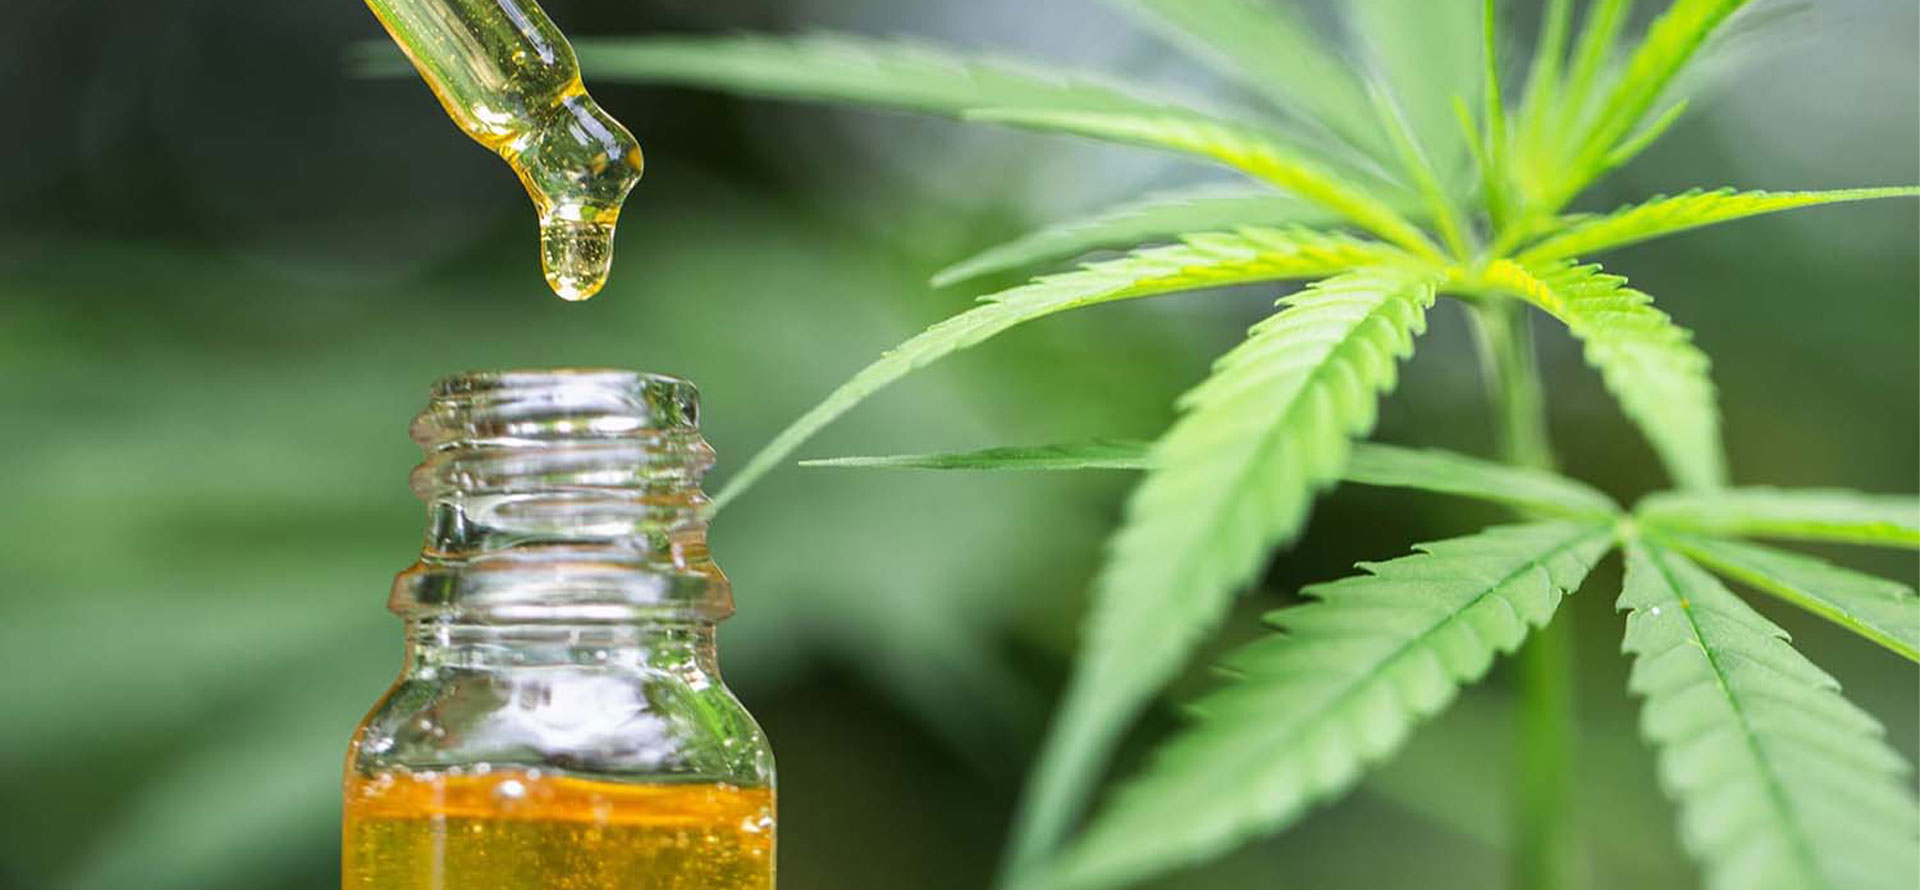 IC CBC OIL ILLEGAL - Cbd|Oil|Benefits|Cbc|Effects|Pain|Study|Health|Thc|Products|Cannabinoids|Studies|Research|Anxiety|Cannabis|Symptoms|Evidence|People|System|Disease|Treatment|Inflammation|Hemp|Body|Receptors|Disorders|Brain|Plant|Cells|Side|Effect|Blood|Patients|Cancer|Product|Skin|Marijuana|Properties|Cannabidiol|Cannabinoid|Cbd Oil|Cbd Products|Cbc Oil|Side Effects|Endocannabinoid System|Chronic Pain|Multiple Sclerosis|Pain Relief|Cannabis Plant|Cbd Oil Benefits|Blood Pressure|Health Benefits|High Blood Pressure|Anti-Inflammatory Properties|Neuropathic Pain|Animal Studies|Hemp Plant|Hemp Oil|Anxiety Disorders|Cbd Product|Immune System|Clinical Trials|Cbd Gummies|Nerve Cells|Nervous System|Entourage Effect|Hemp Seed Oil|United States|Cbd Oils|Drug Administration